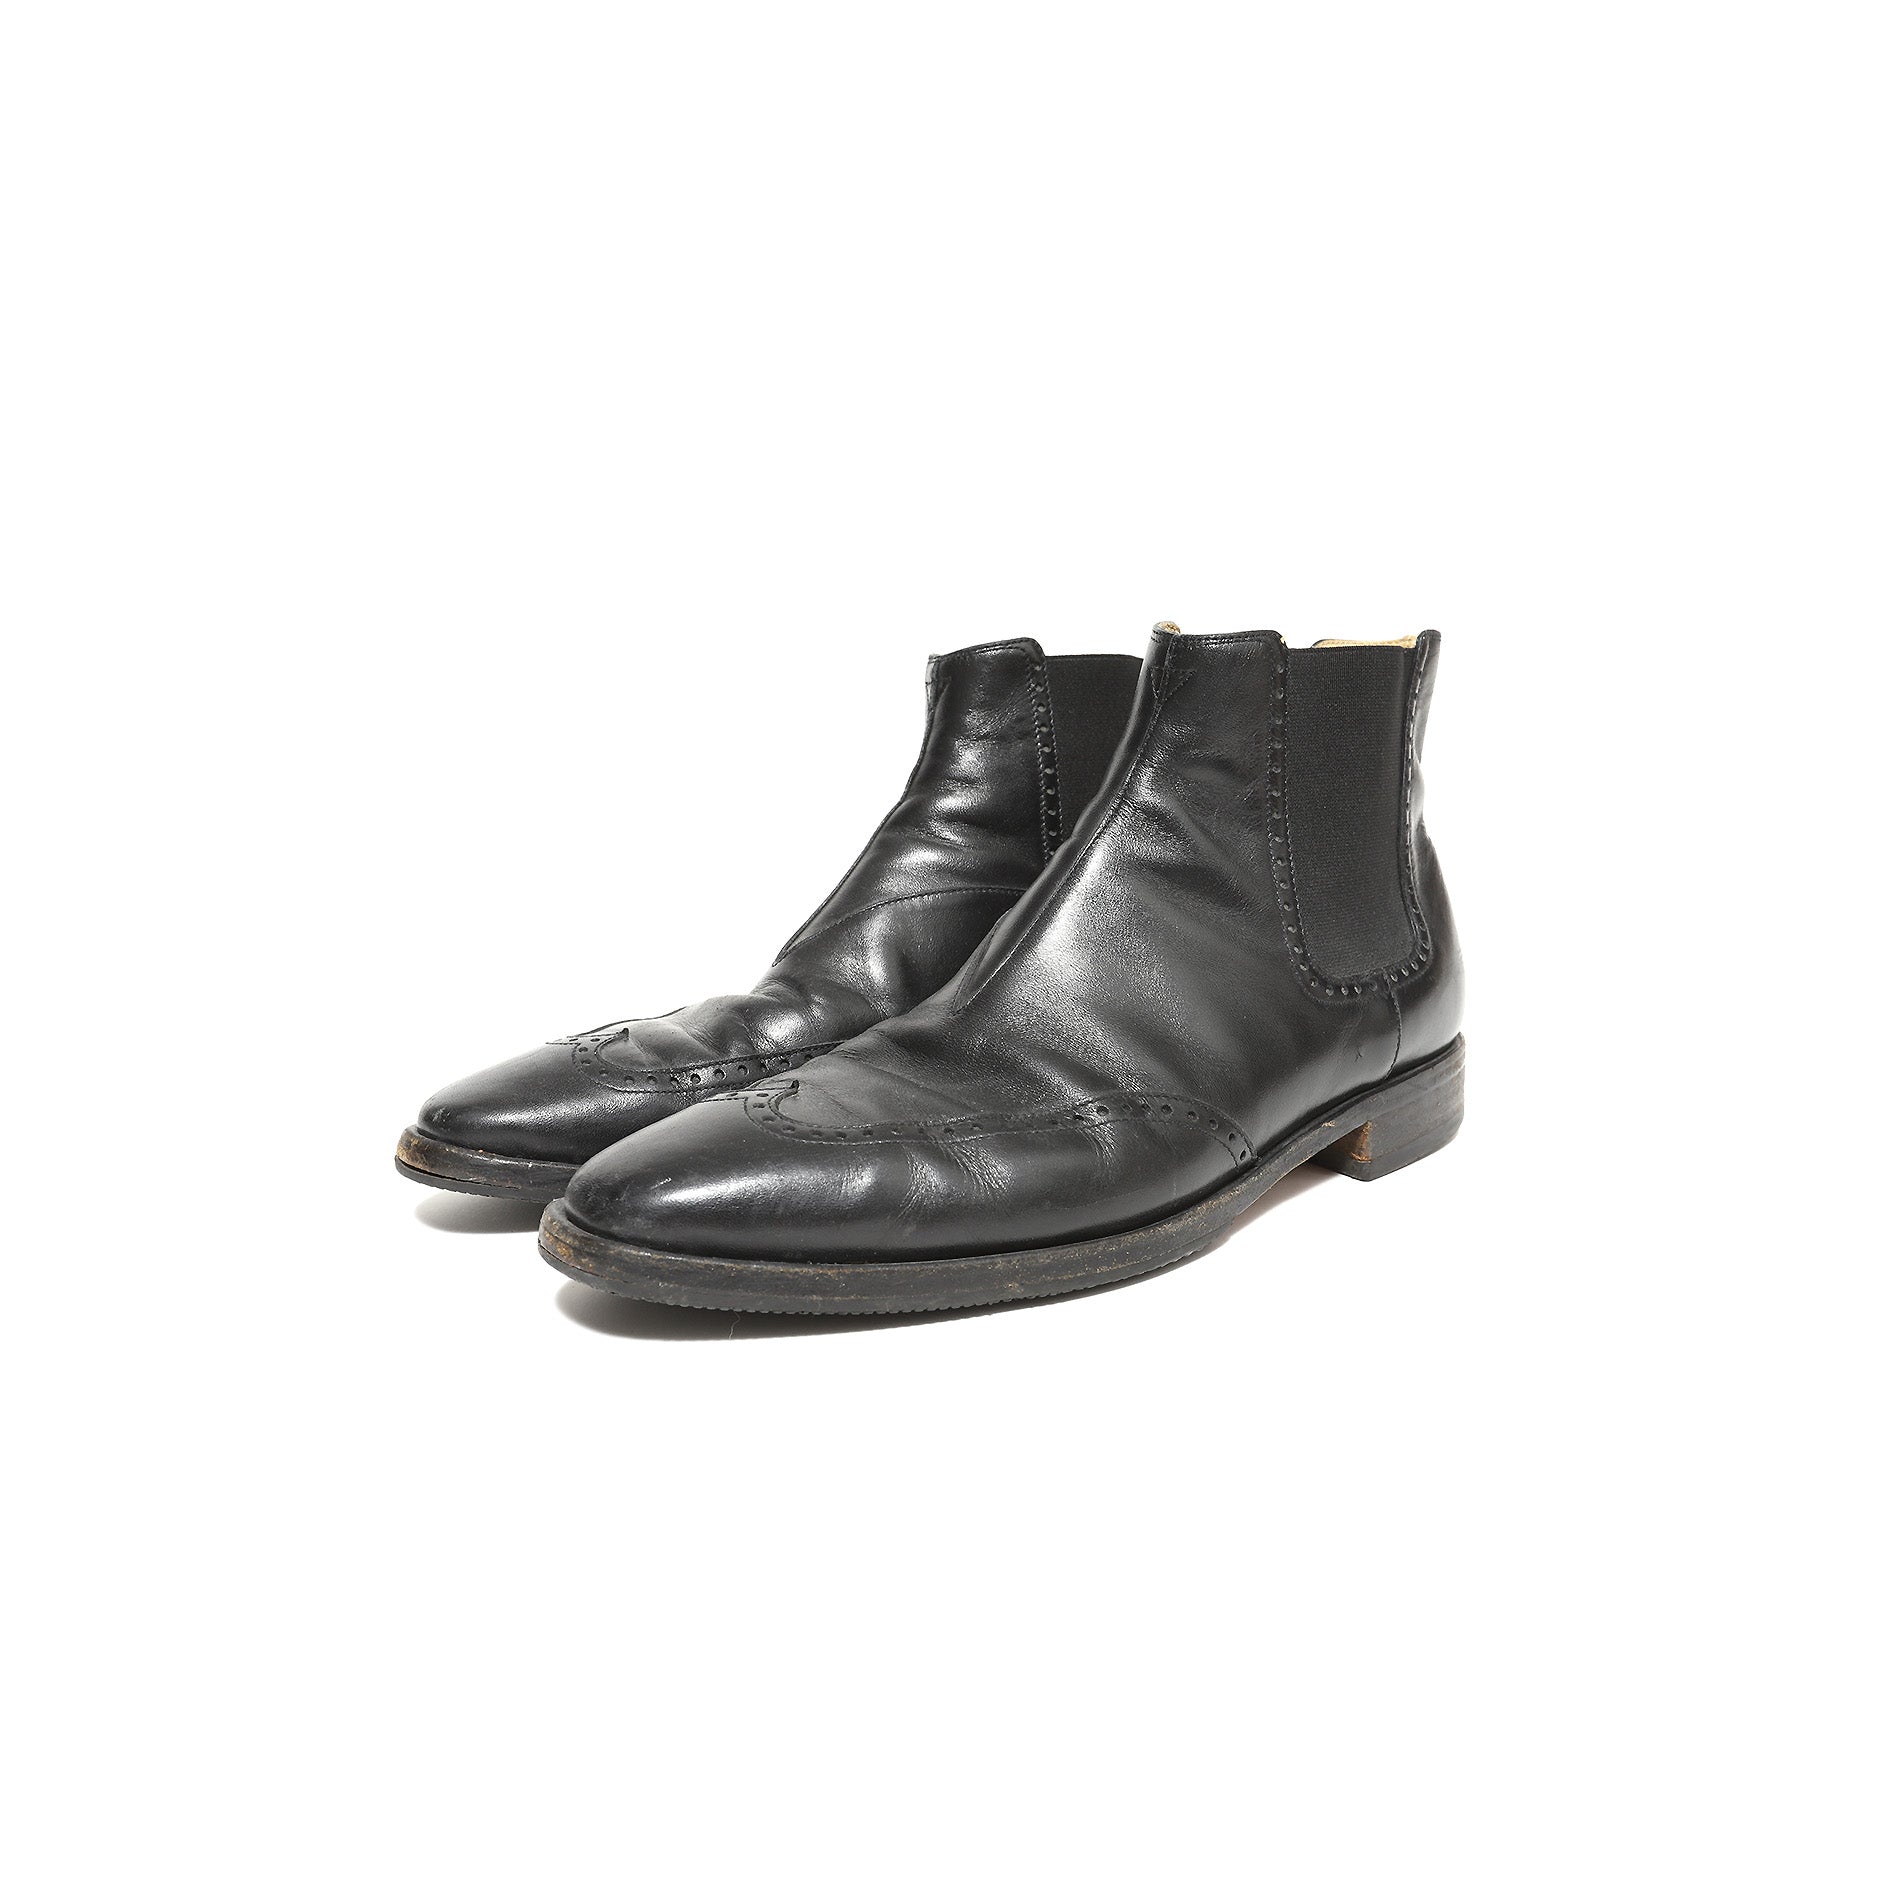 Helmut Lang AW04 Brogue Chelsea Boots